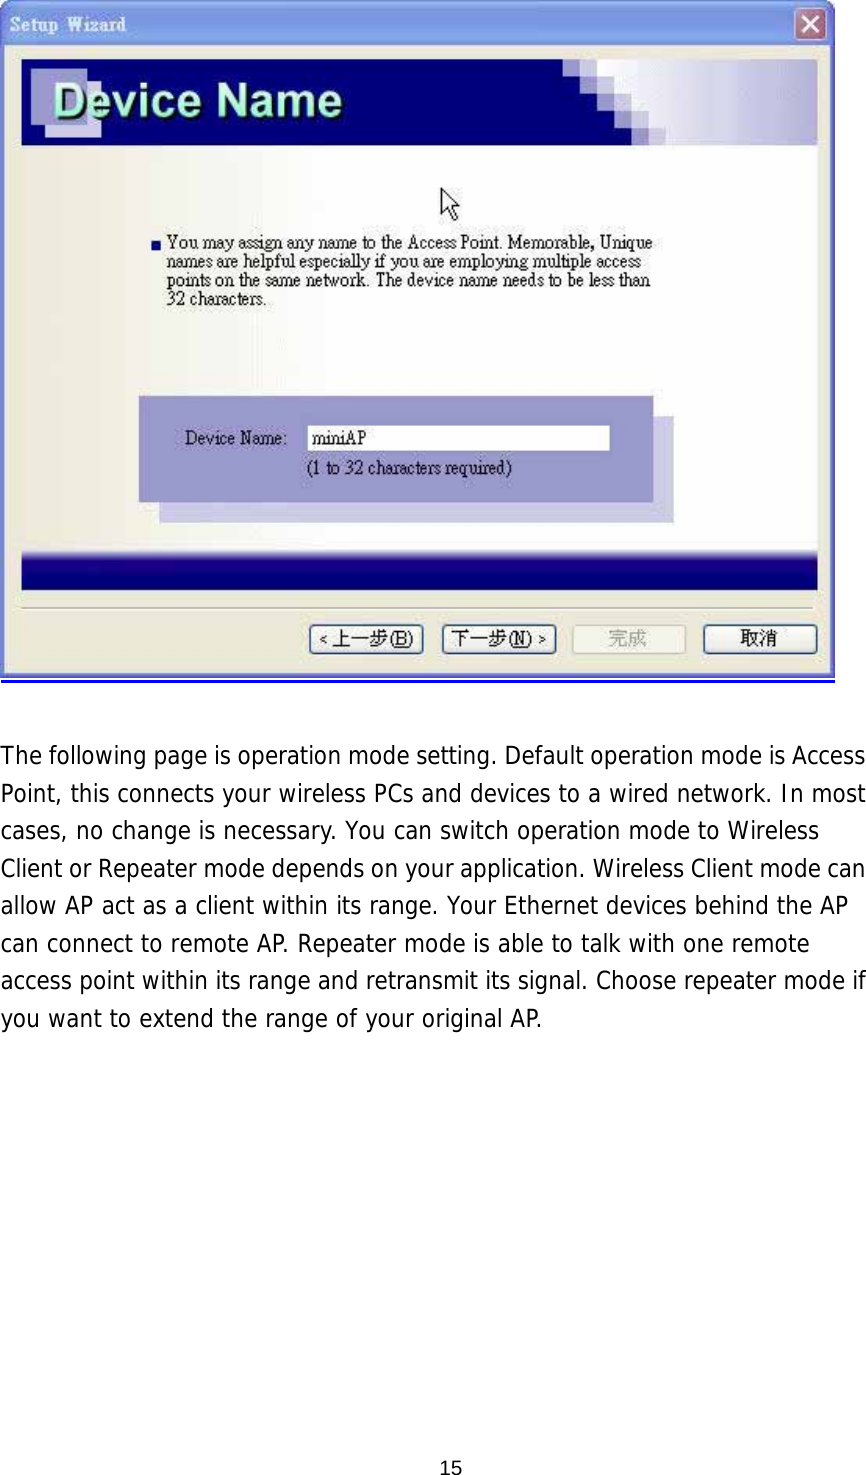   The following page is operation mode setting. Default operation mode is Access Point, this connects your wireless PCs and devices to a wired network. In most cases, no change is necessary. You can switch operation mode to Wireless Client or Repeater mode depends on your application. Wireless Client mode can allow AP act as a client within its range. Your Ethernet devices behind the AP can connect to remote AP. Repeater mode is able to talk with one remote access point within its range and retransmit its signal. Choose repeater mode if you want to extend the range of your original AP.  15